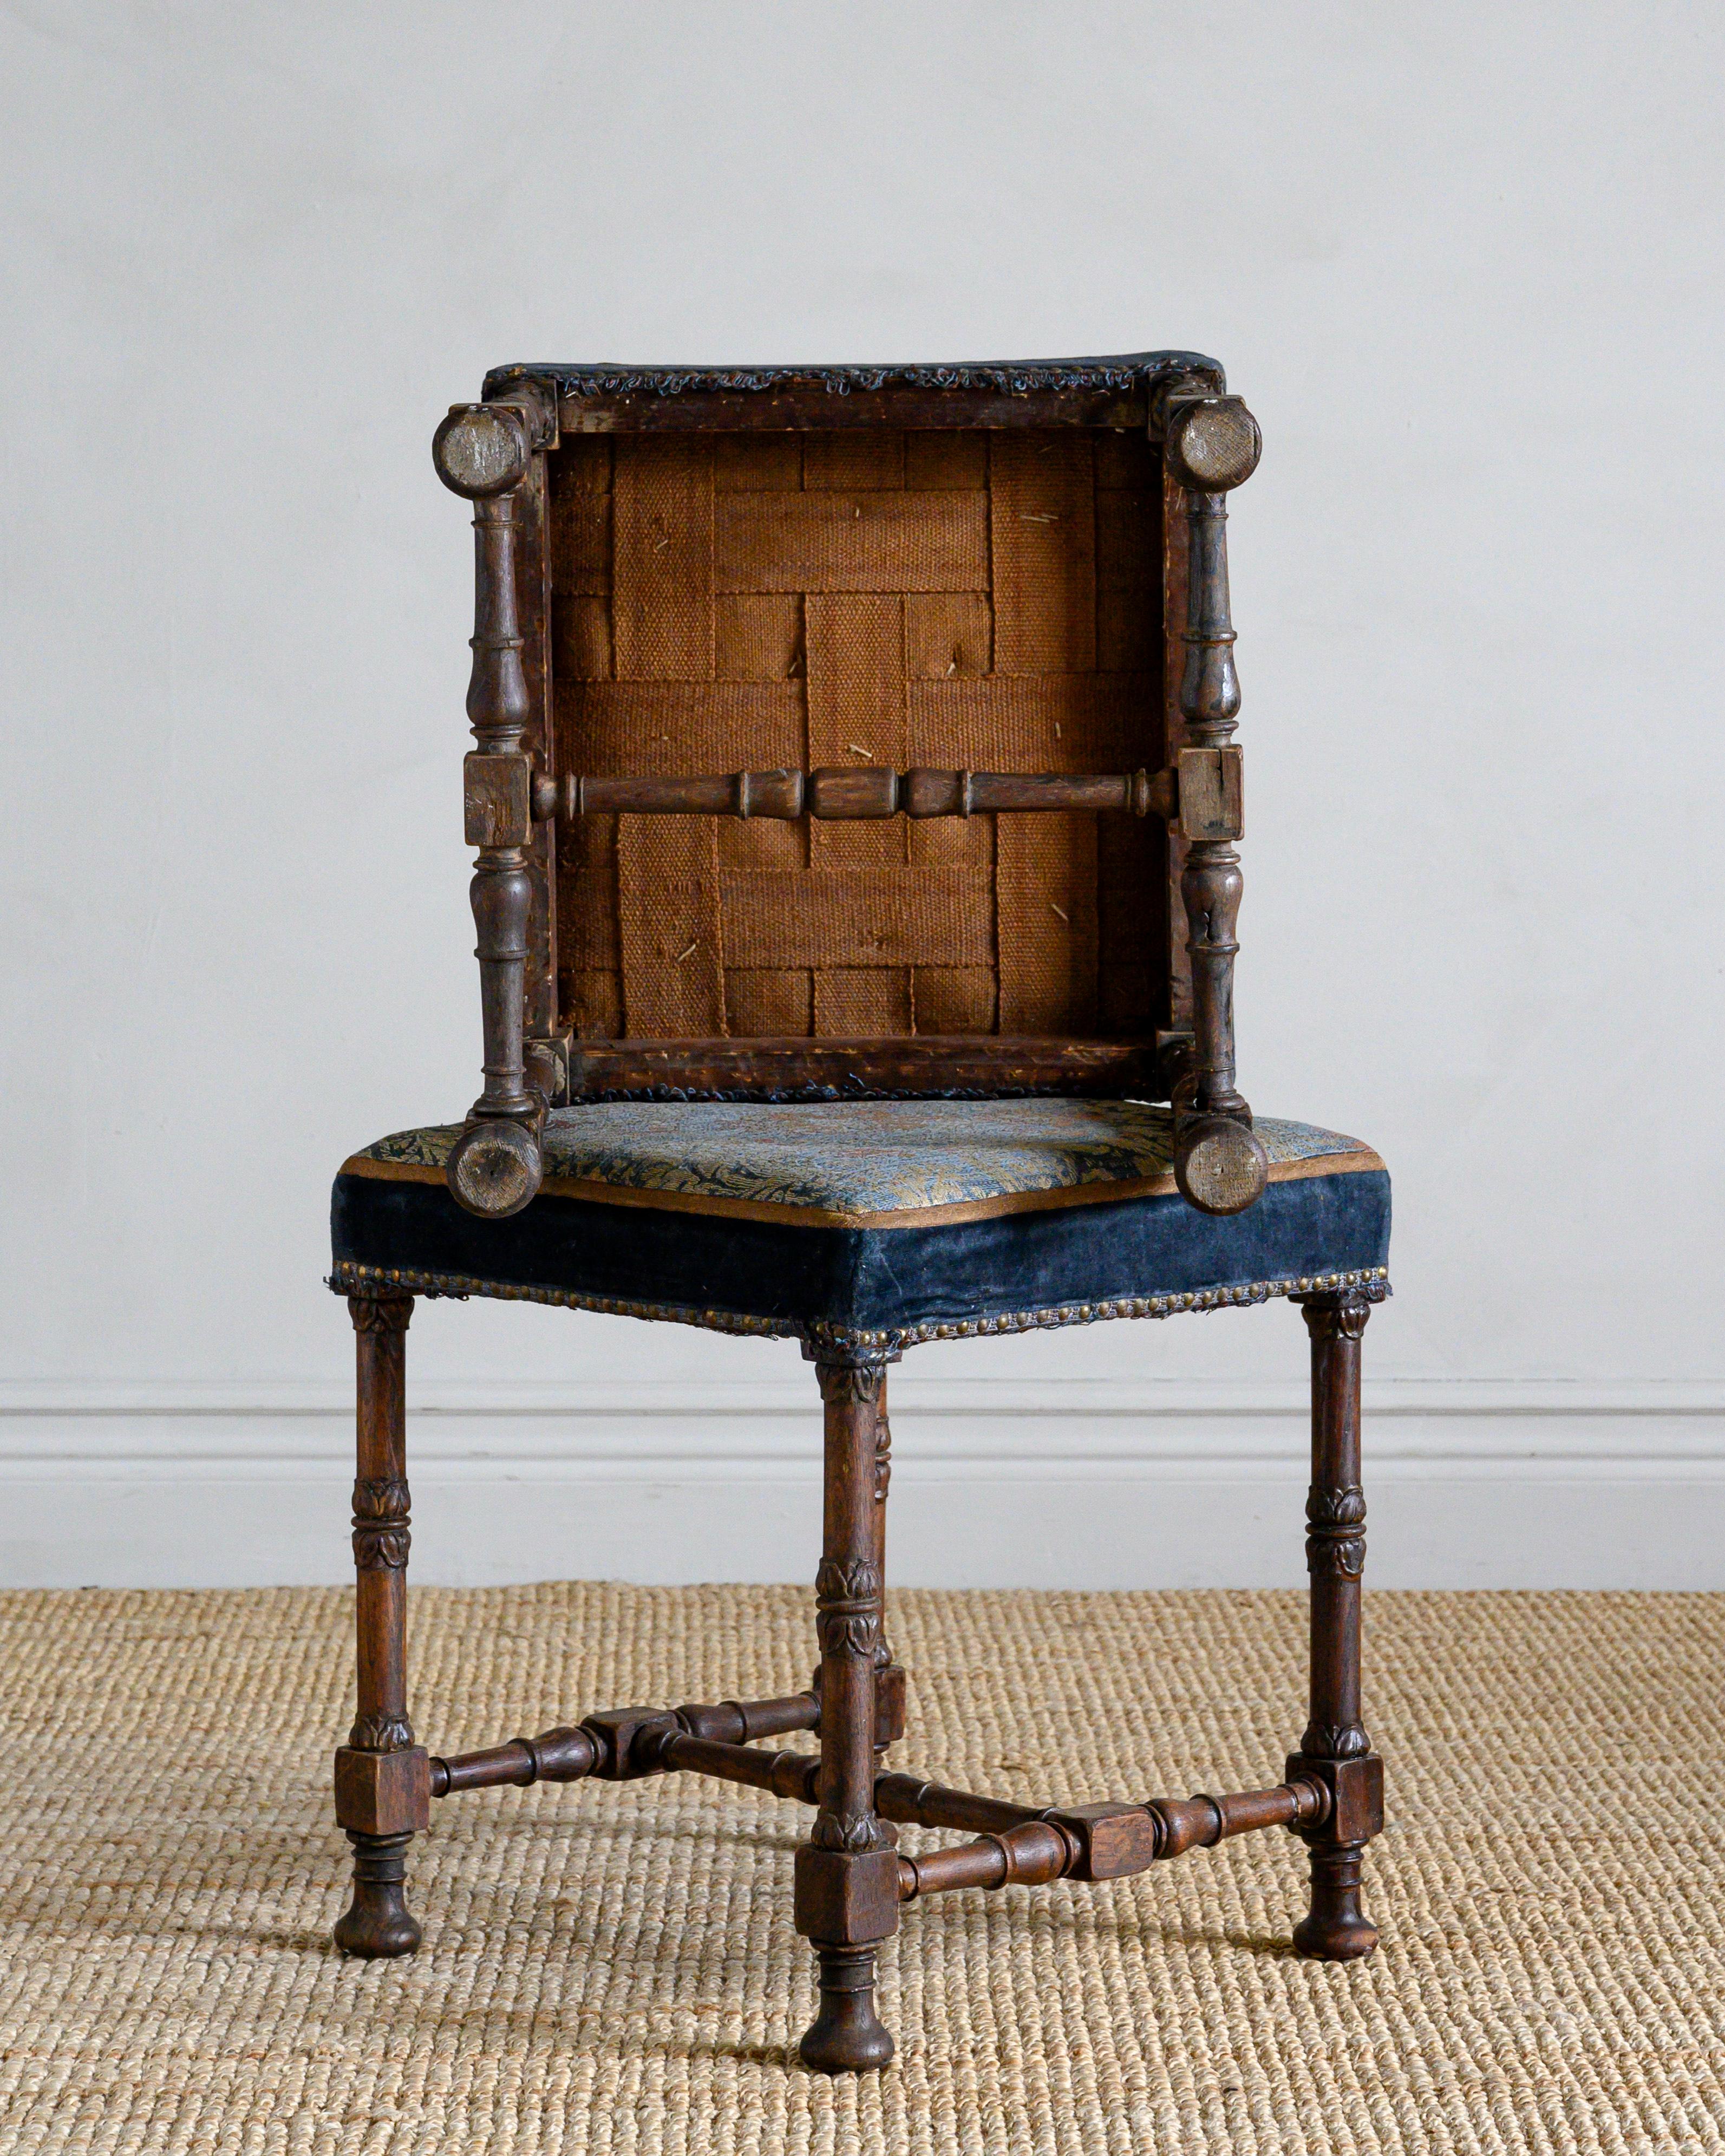 Hand-Crafted 19th Century Jacobean Revival Stools